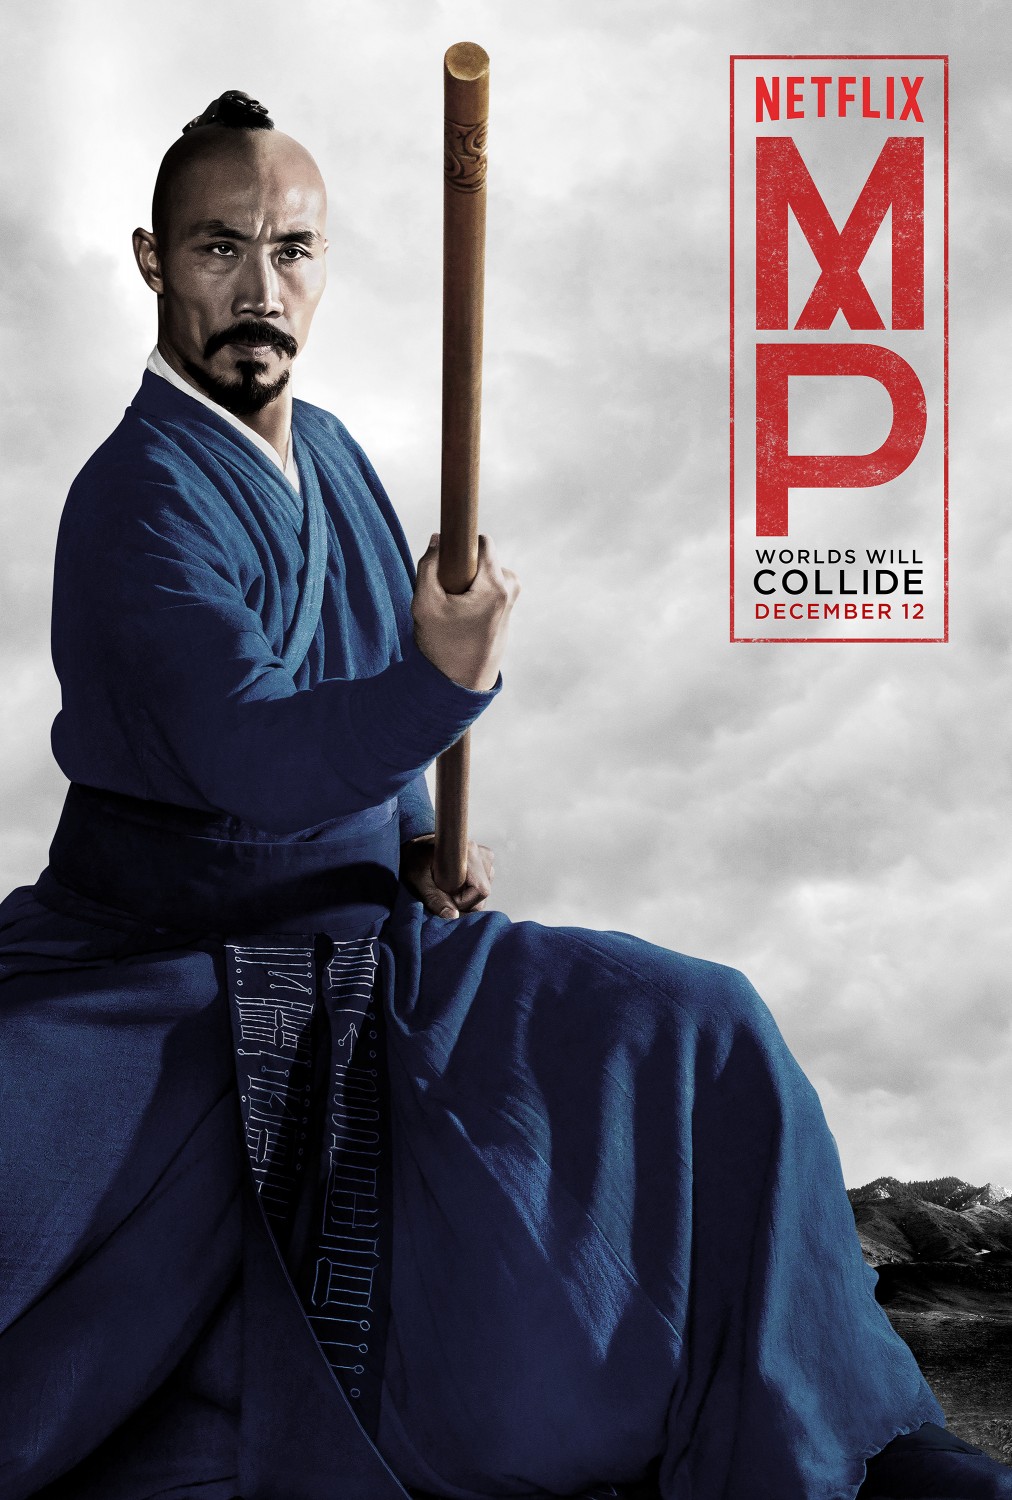 Extra Large TV Poster Image for Marco Polo (#4 of 12)